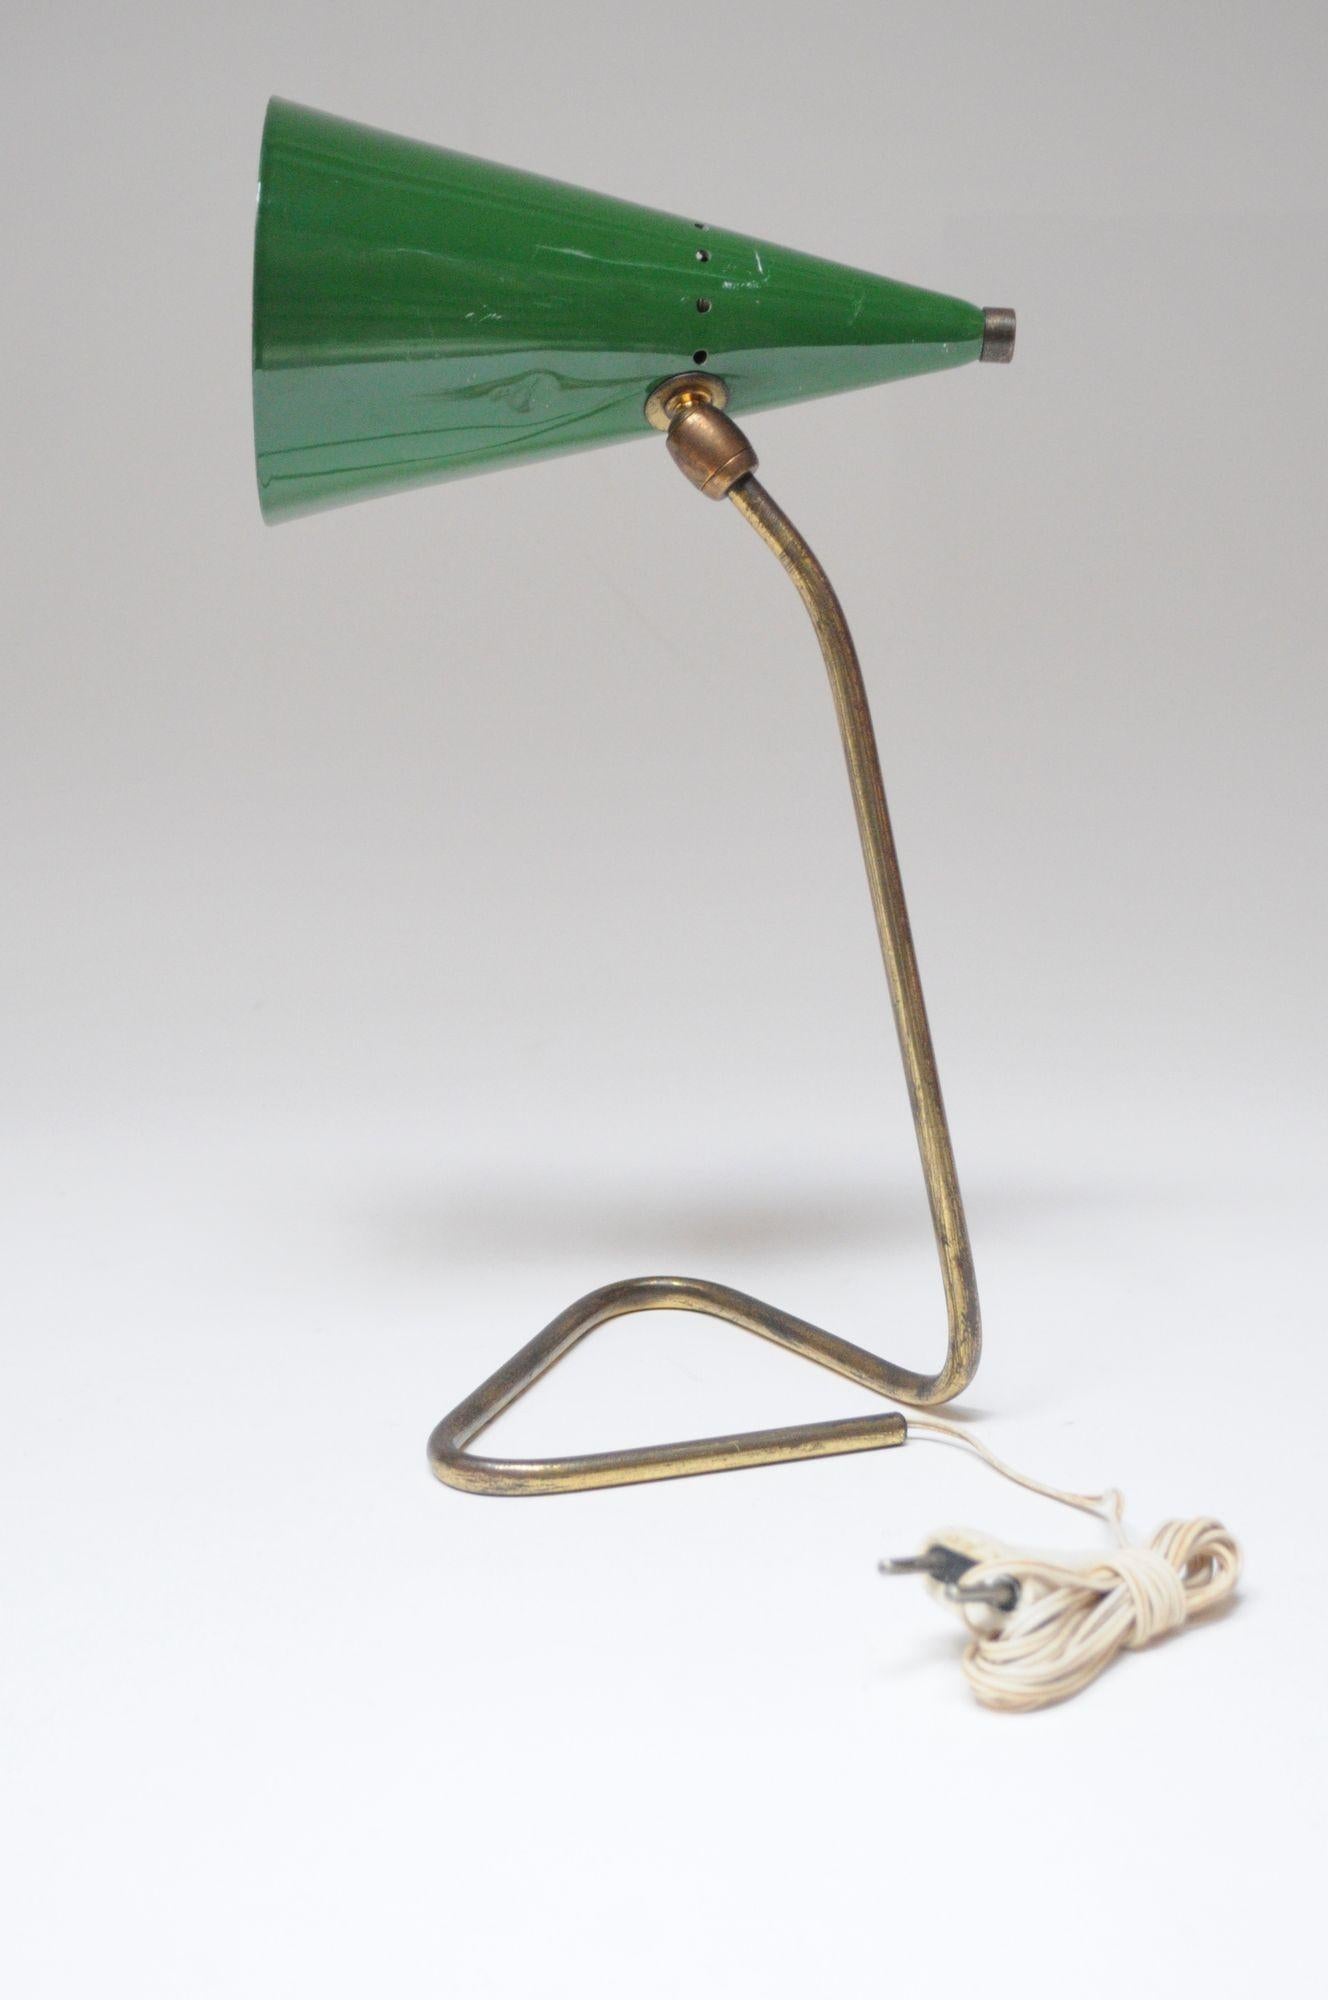 Italian Modern Brass and Green Metal Petite Table Lamp by Gilardi and Barzaghi In Good Condition For Sale In Brooklyn, NY